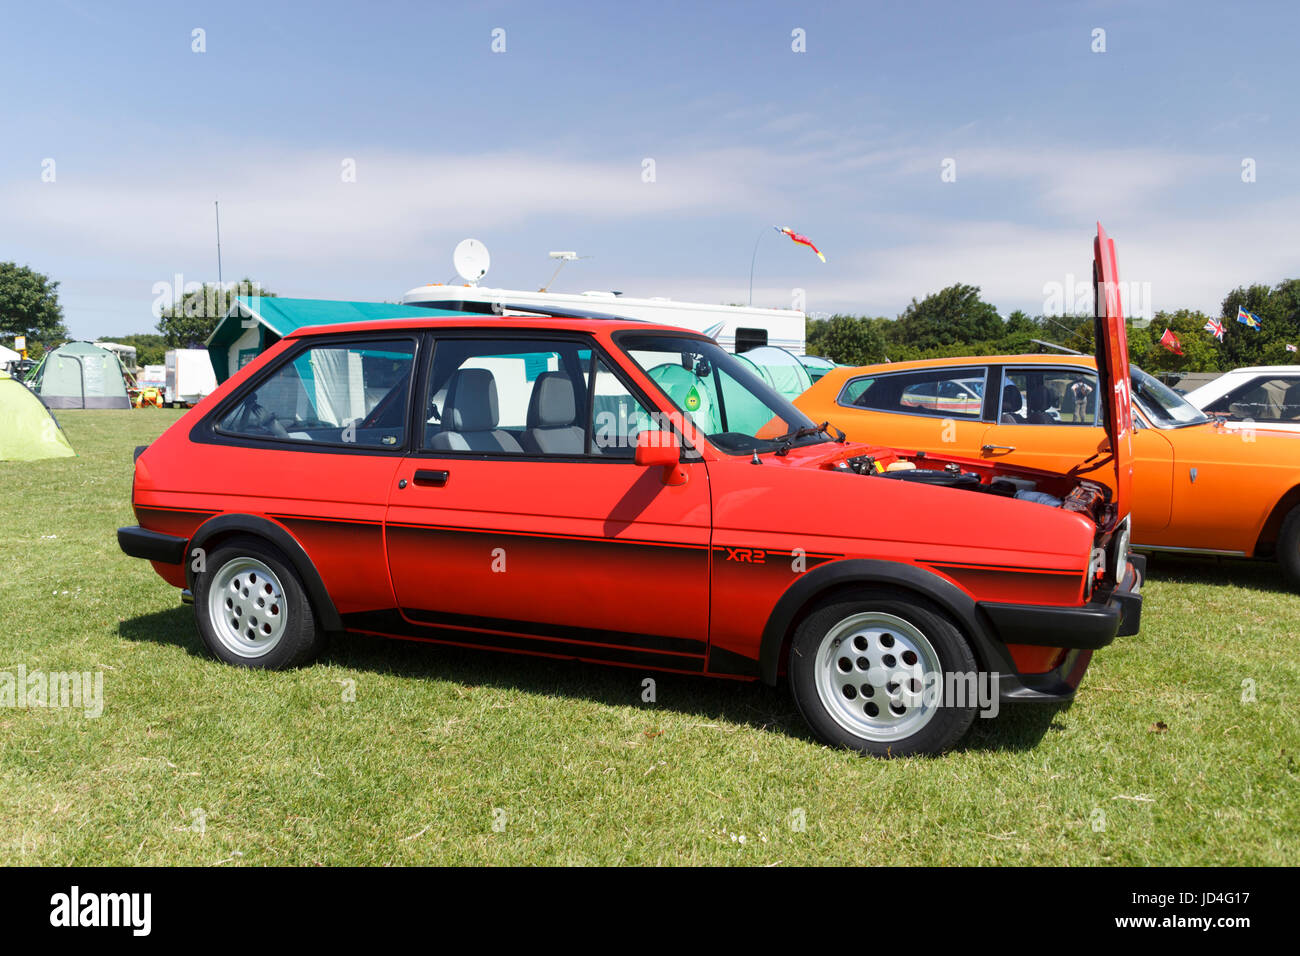 Ford Fiesta XR2 Banque D'Images